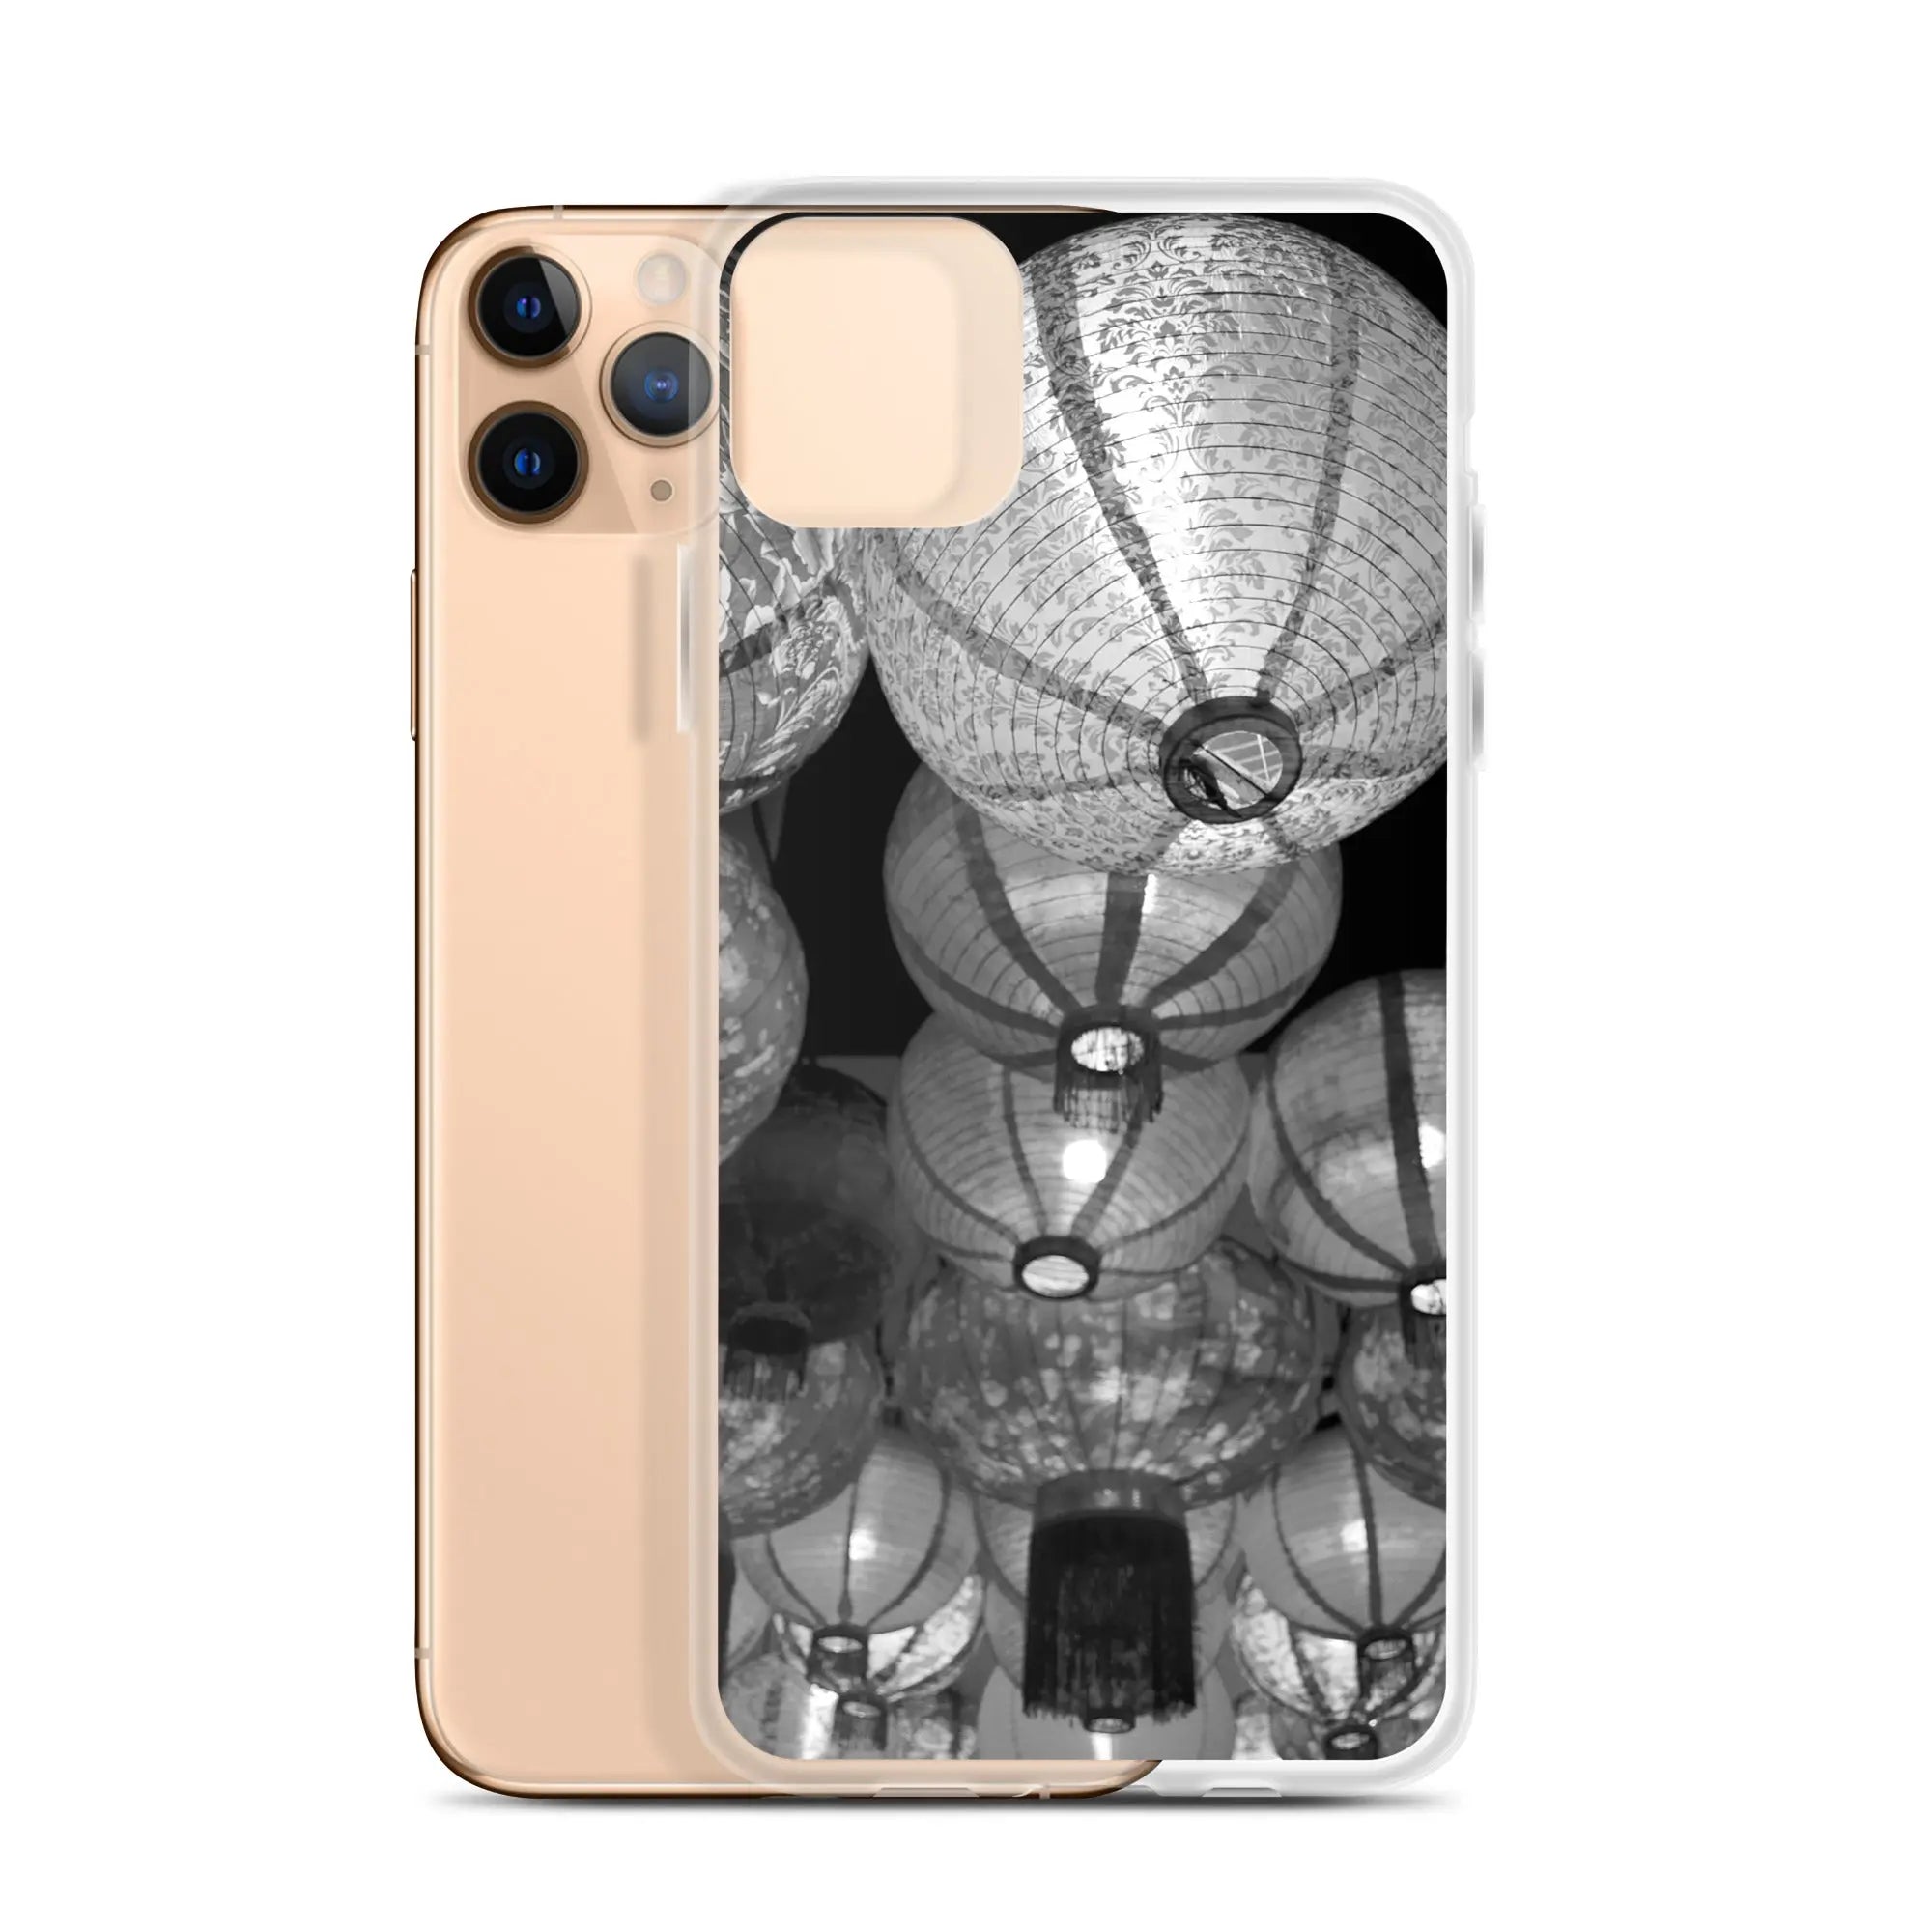 Raise The Red Lanterns - Designer Travels Art Iphone Case - Black And White - Iphone 11 Pro Max - Mobile Phone Cases